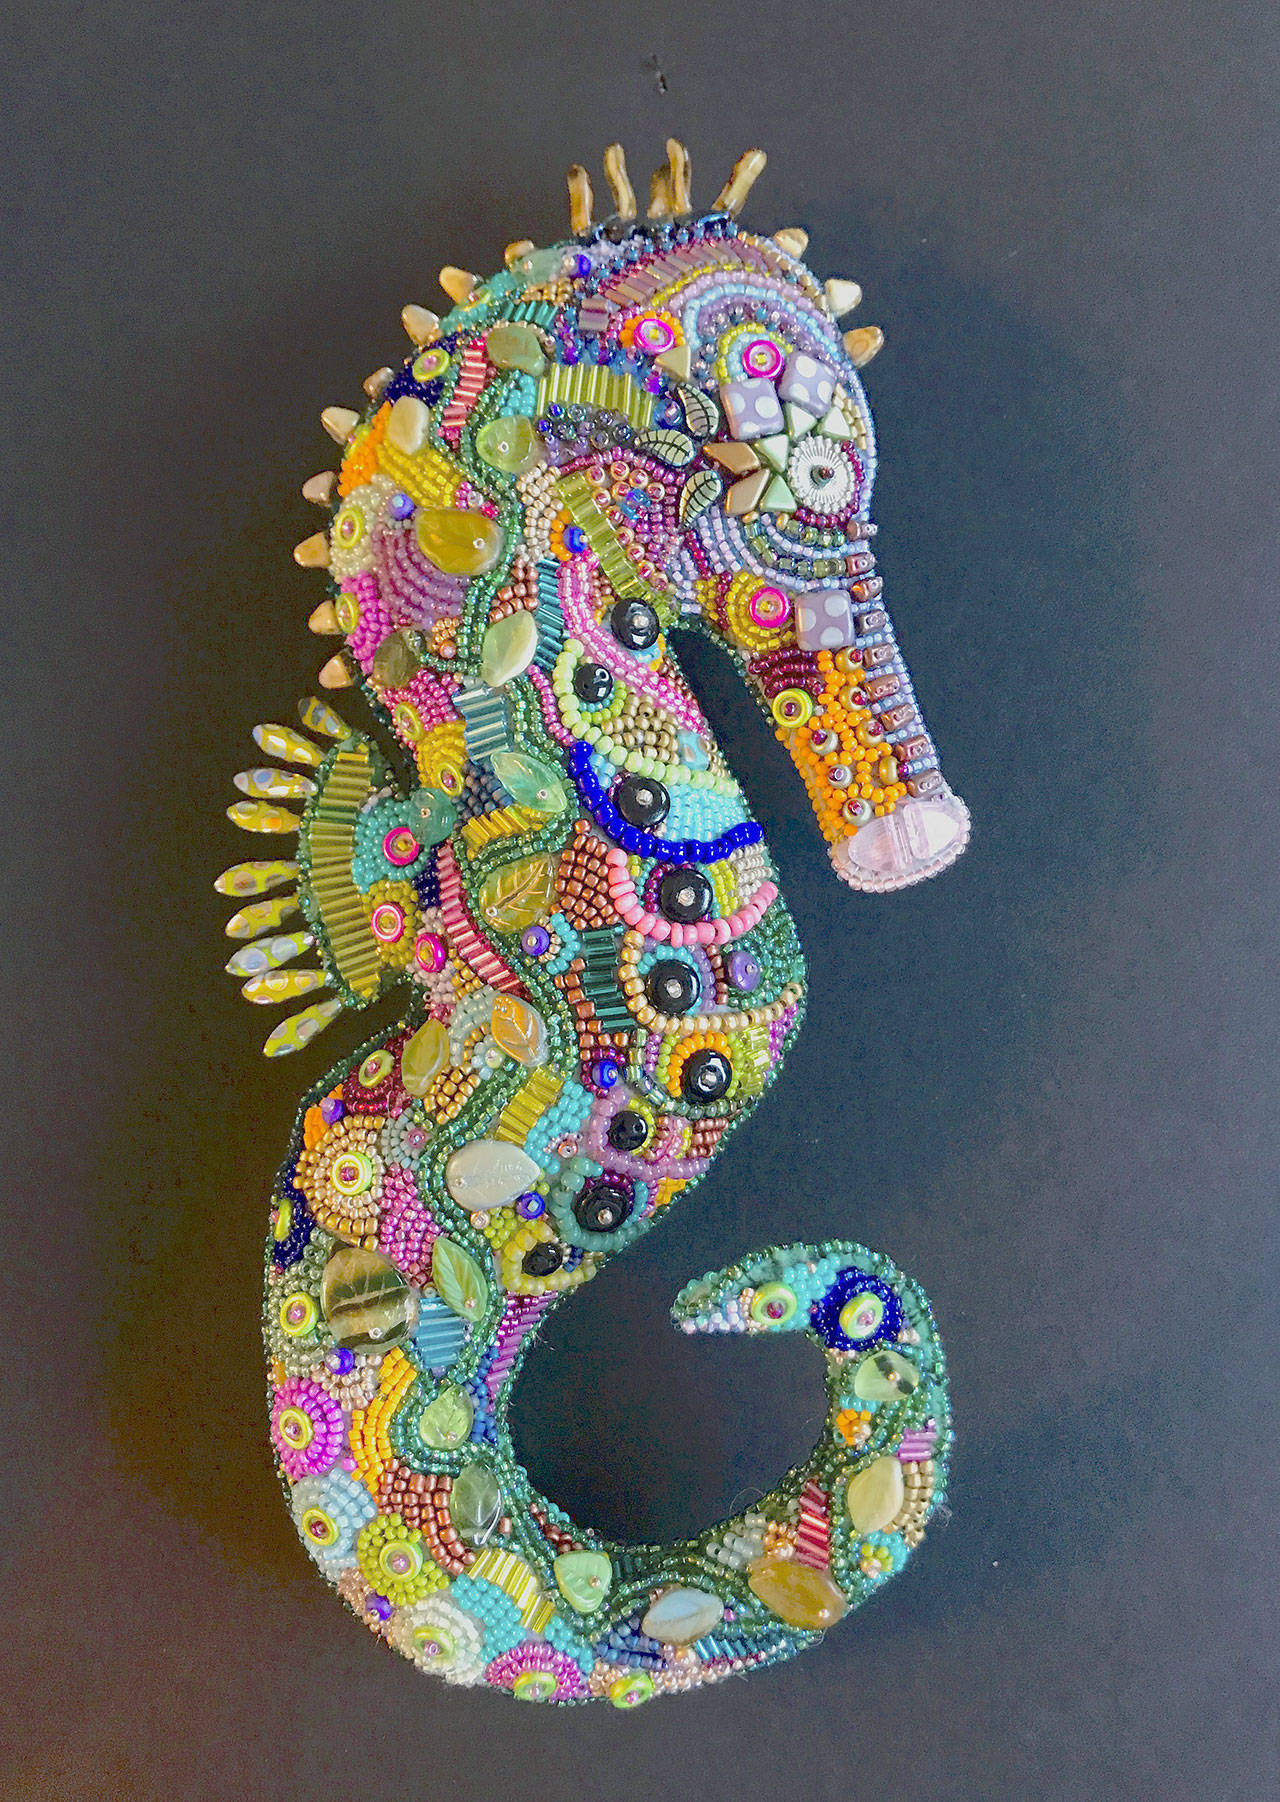 “Seahorse,” by Pat Herkal is among the textile artworks on display at the Northwind Art Grover Gallery.